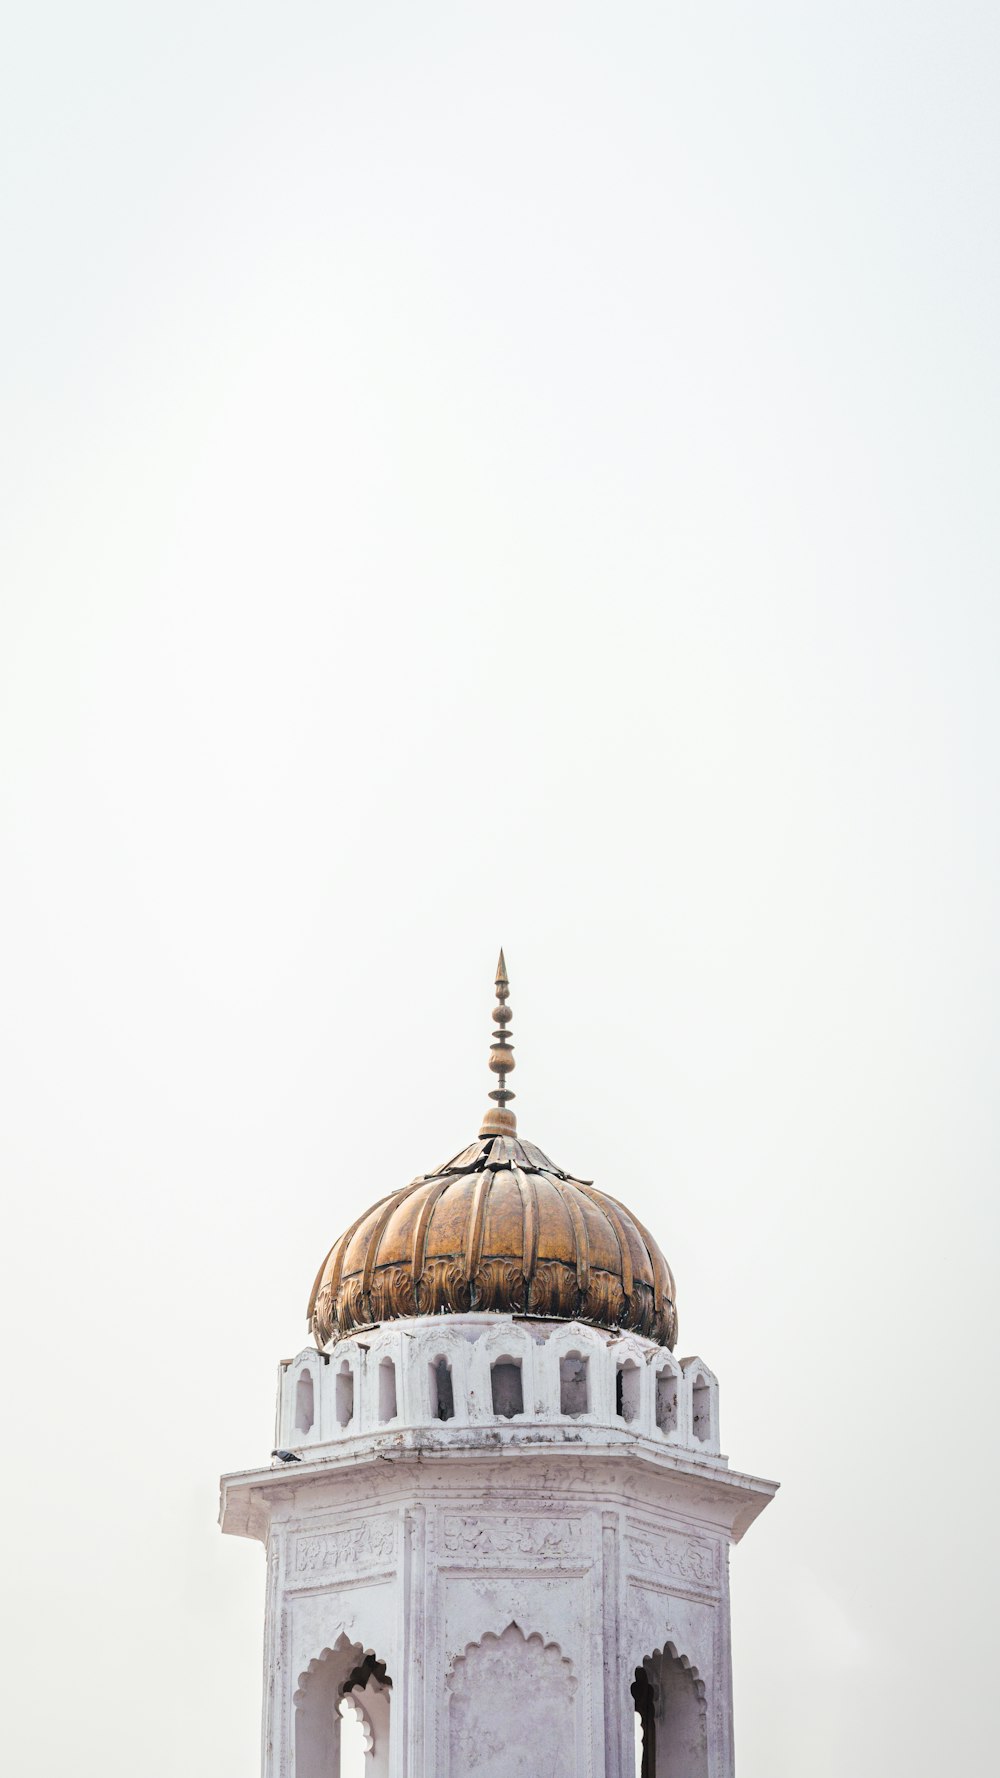 a white building with a golden dome on top